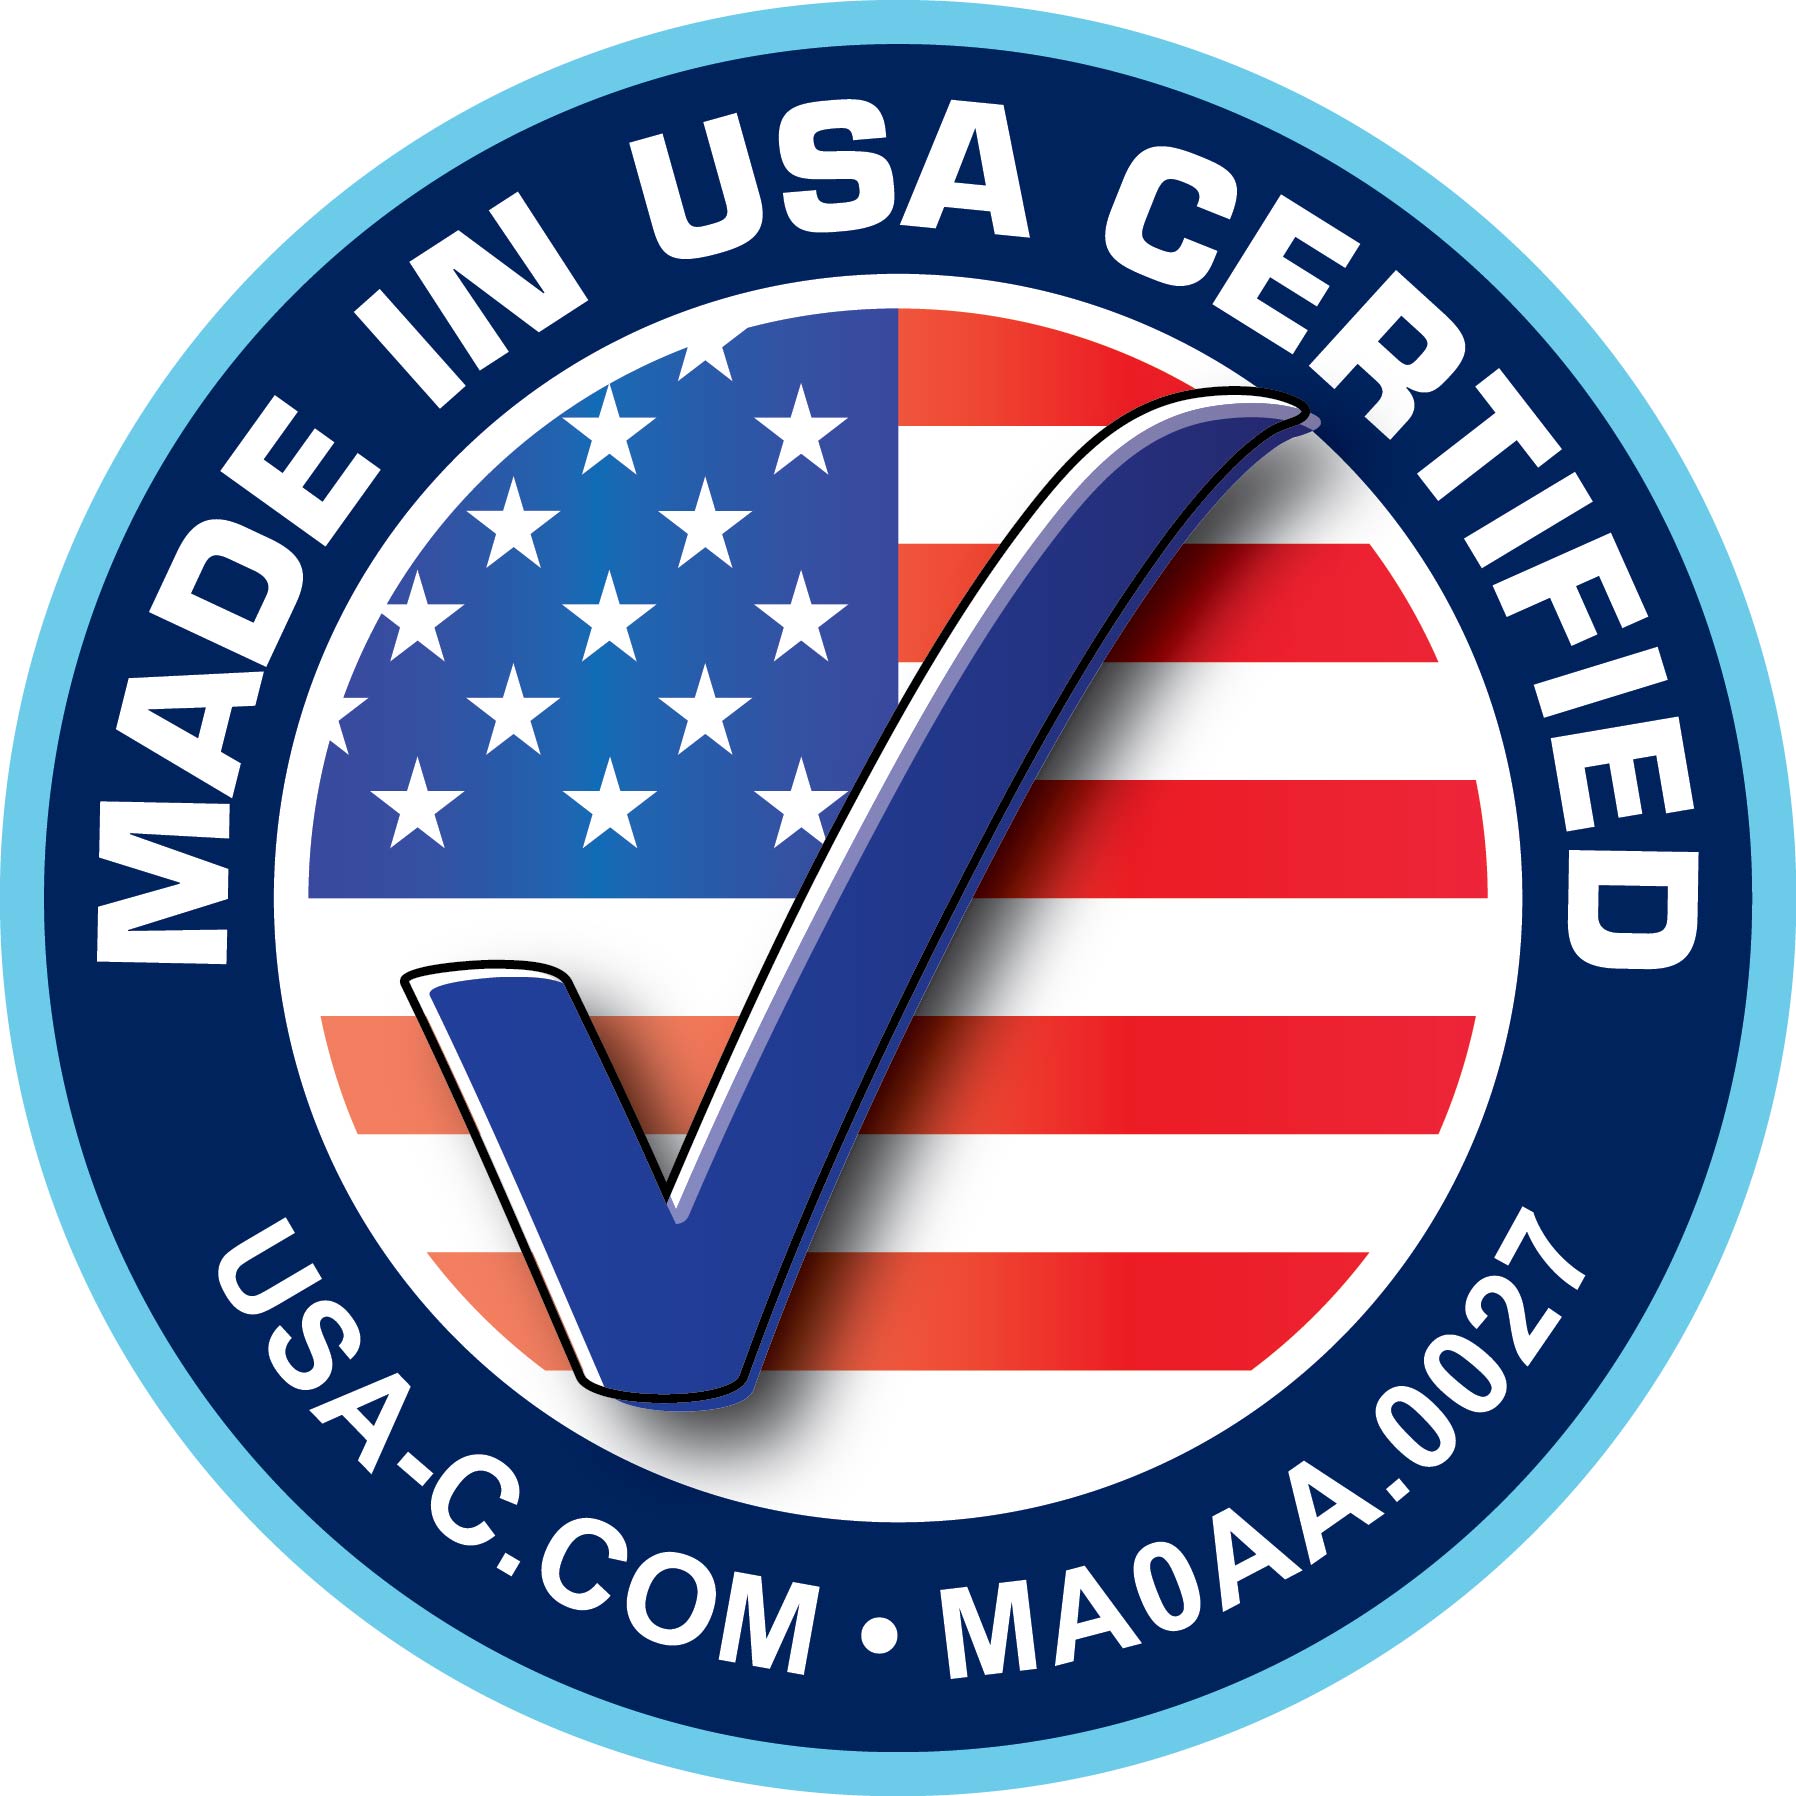 Us com product. Made in USA. Made in USA logo. Made in u.s.a. Products made in the USA.